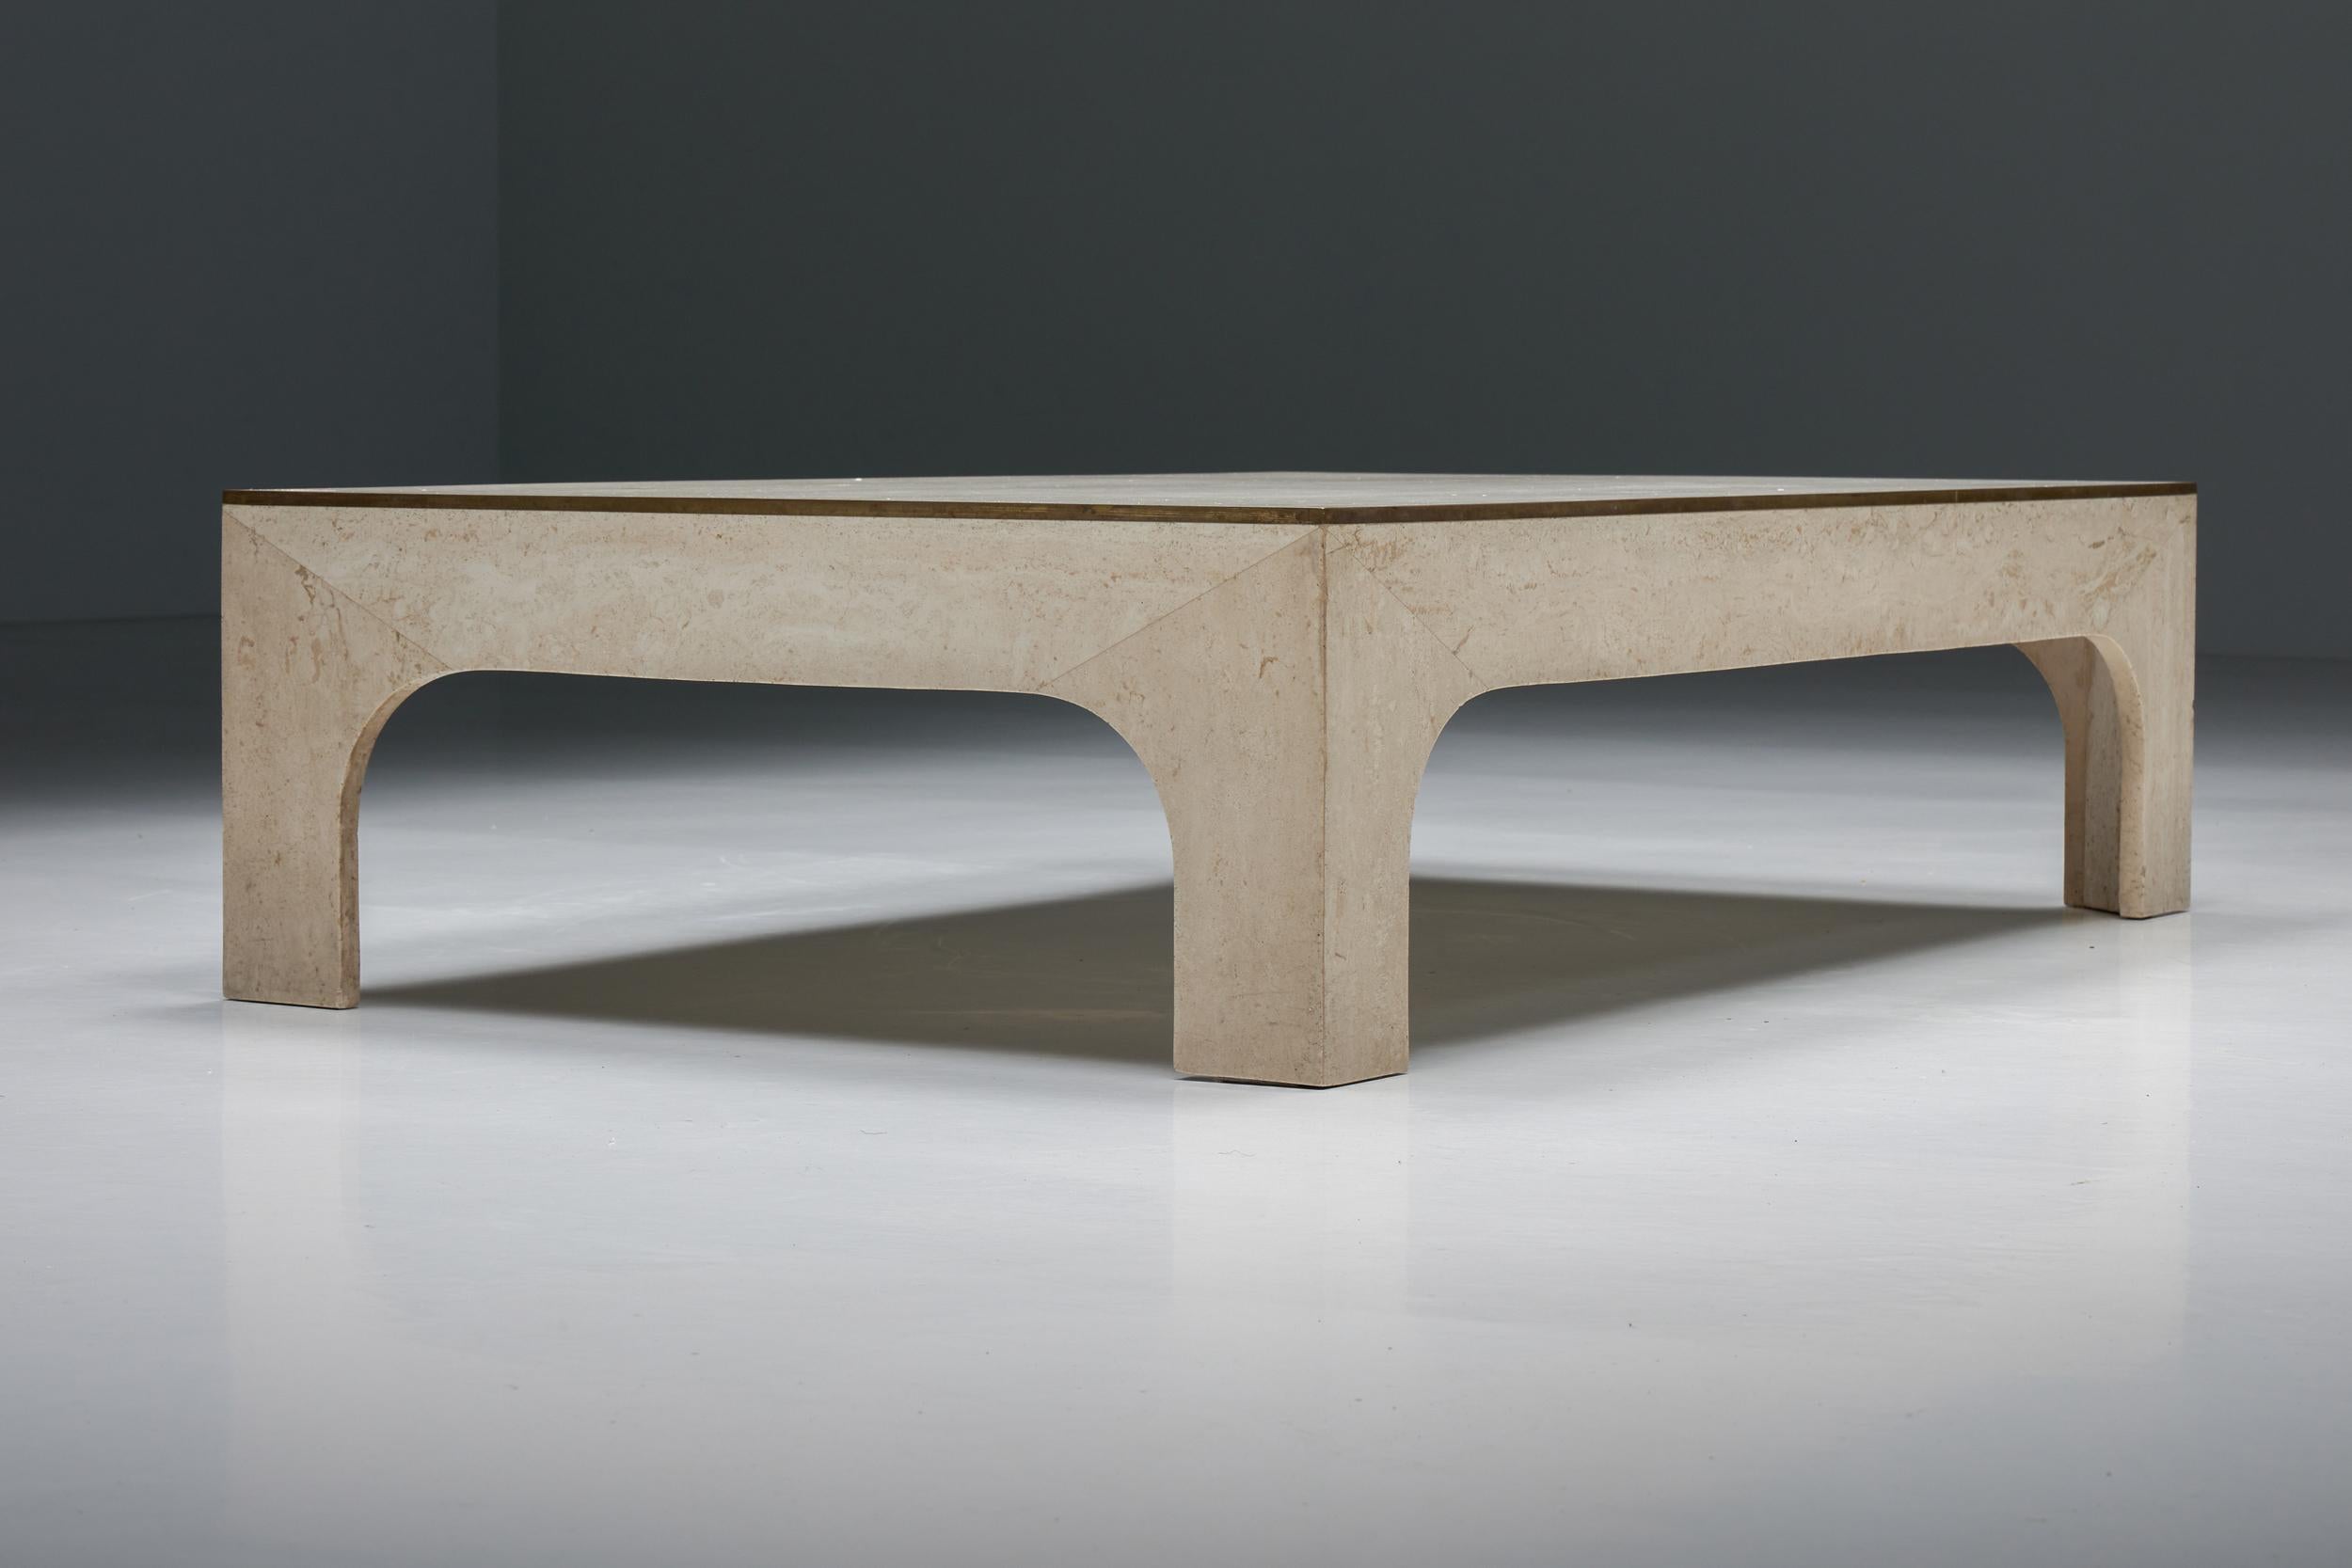 Brass Italian Travertine Coffee Table by Willy Rizzo, Hollywood Regency, 1970s For Sale